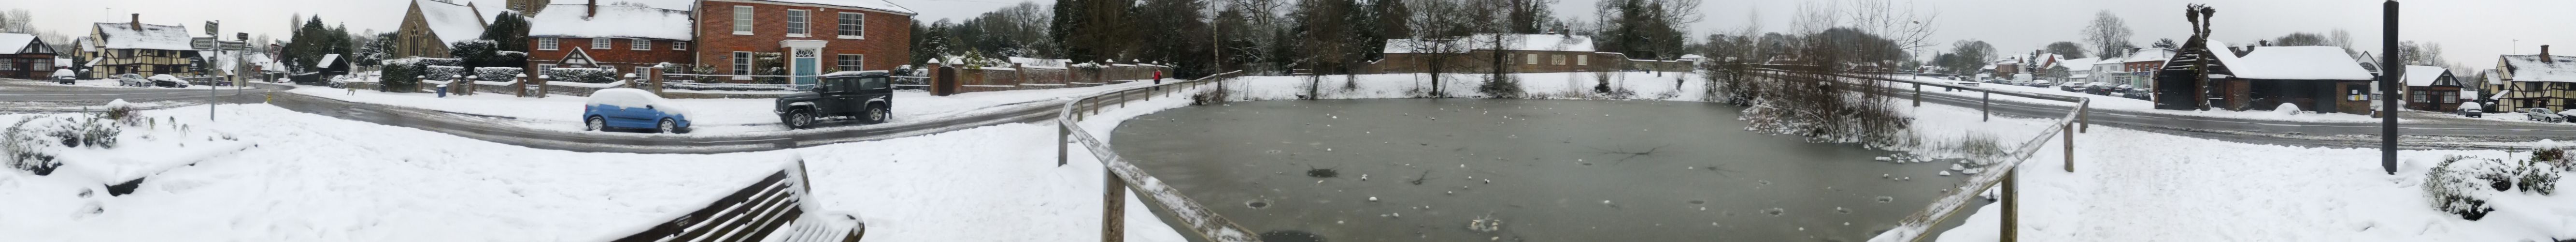 360° view of Chiddingfold Village Pond  with ice and snow and surround area